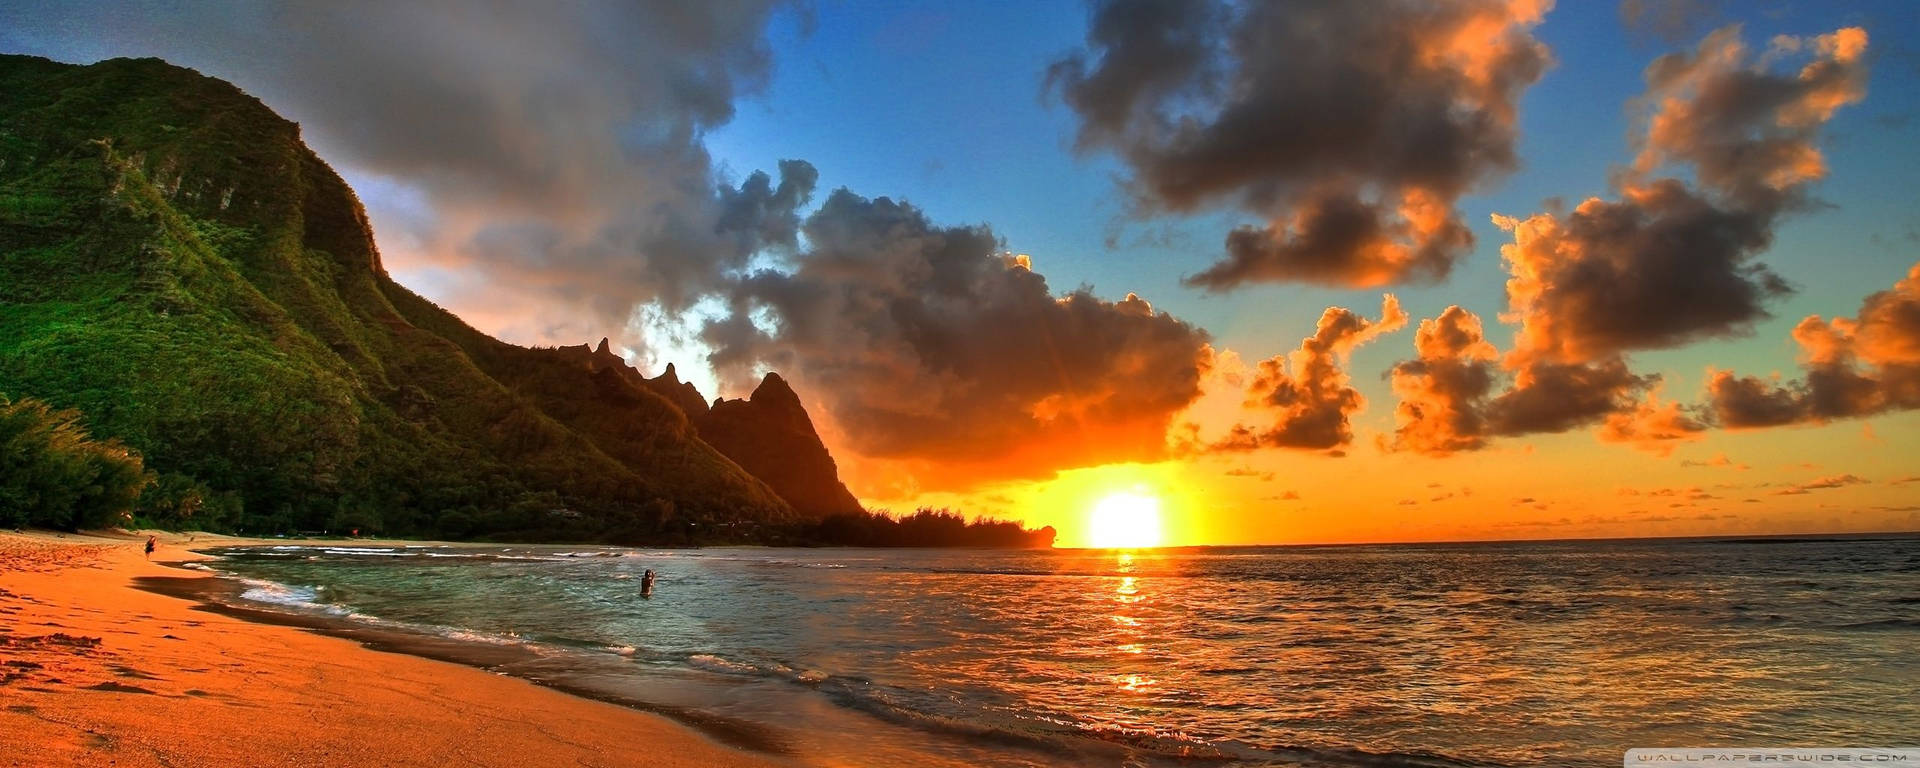 a sunset over a beach with mountains in the background Wallpaper